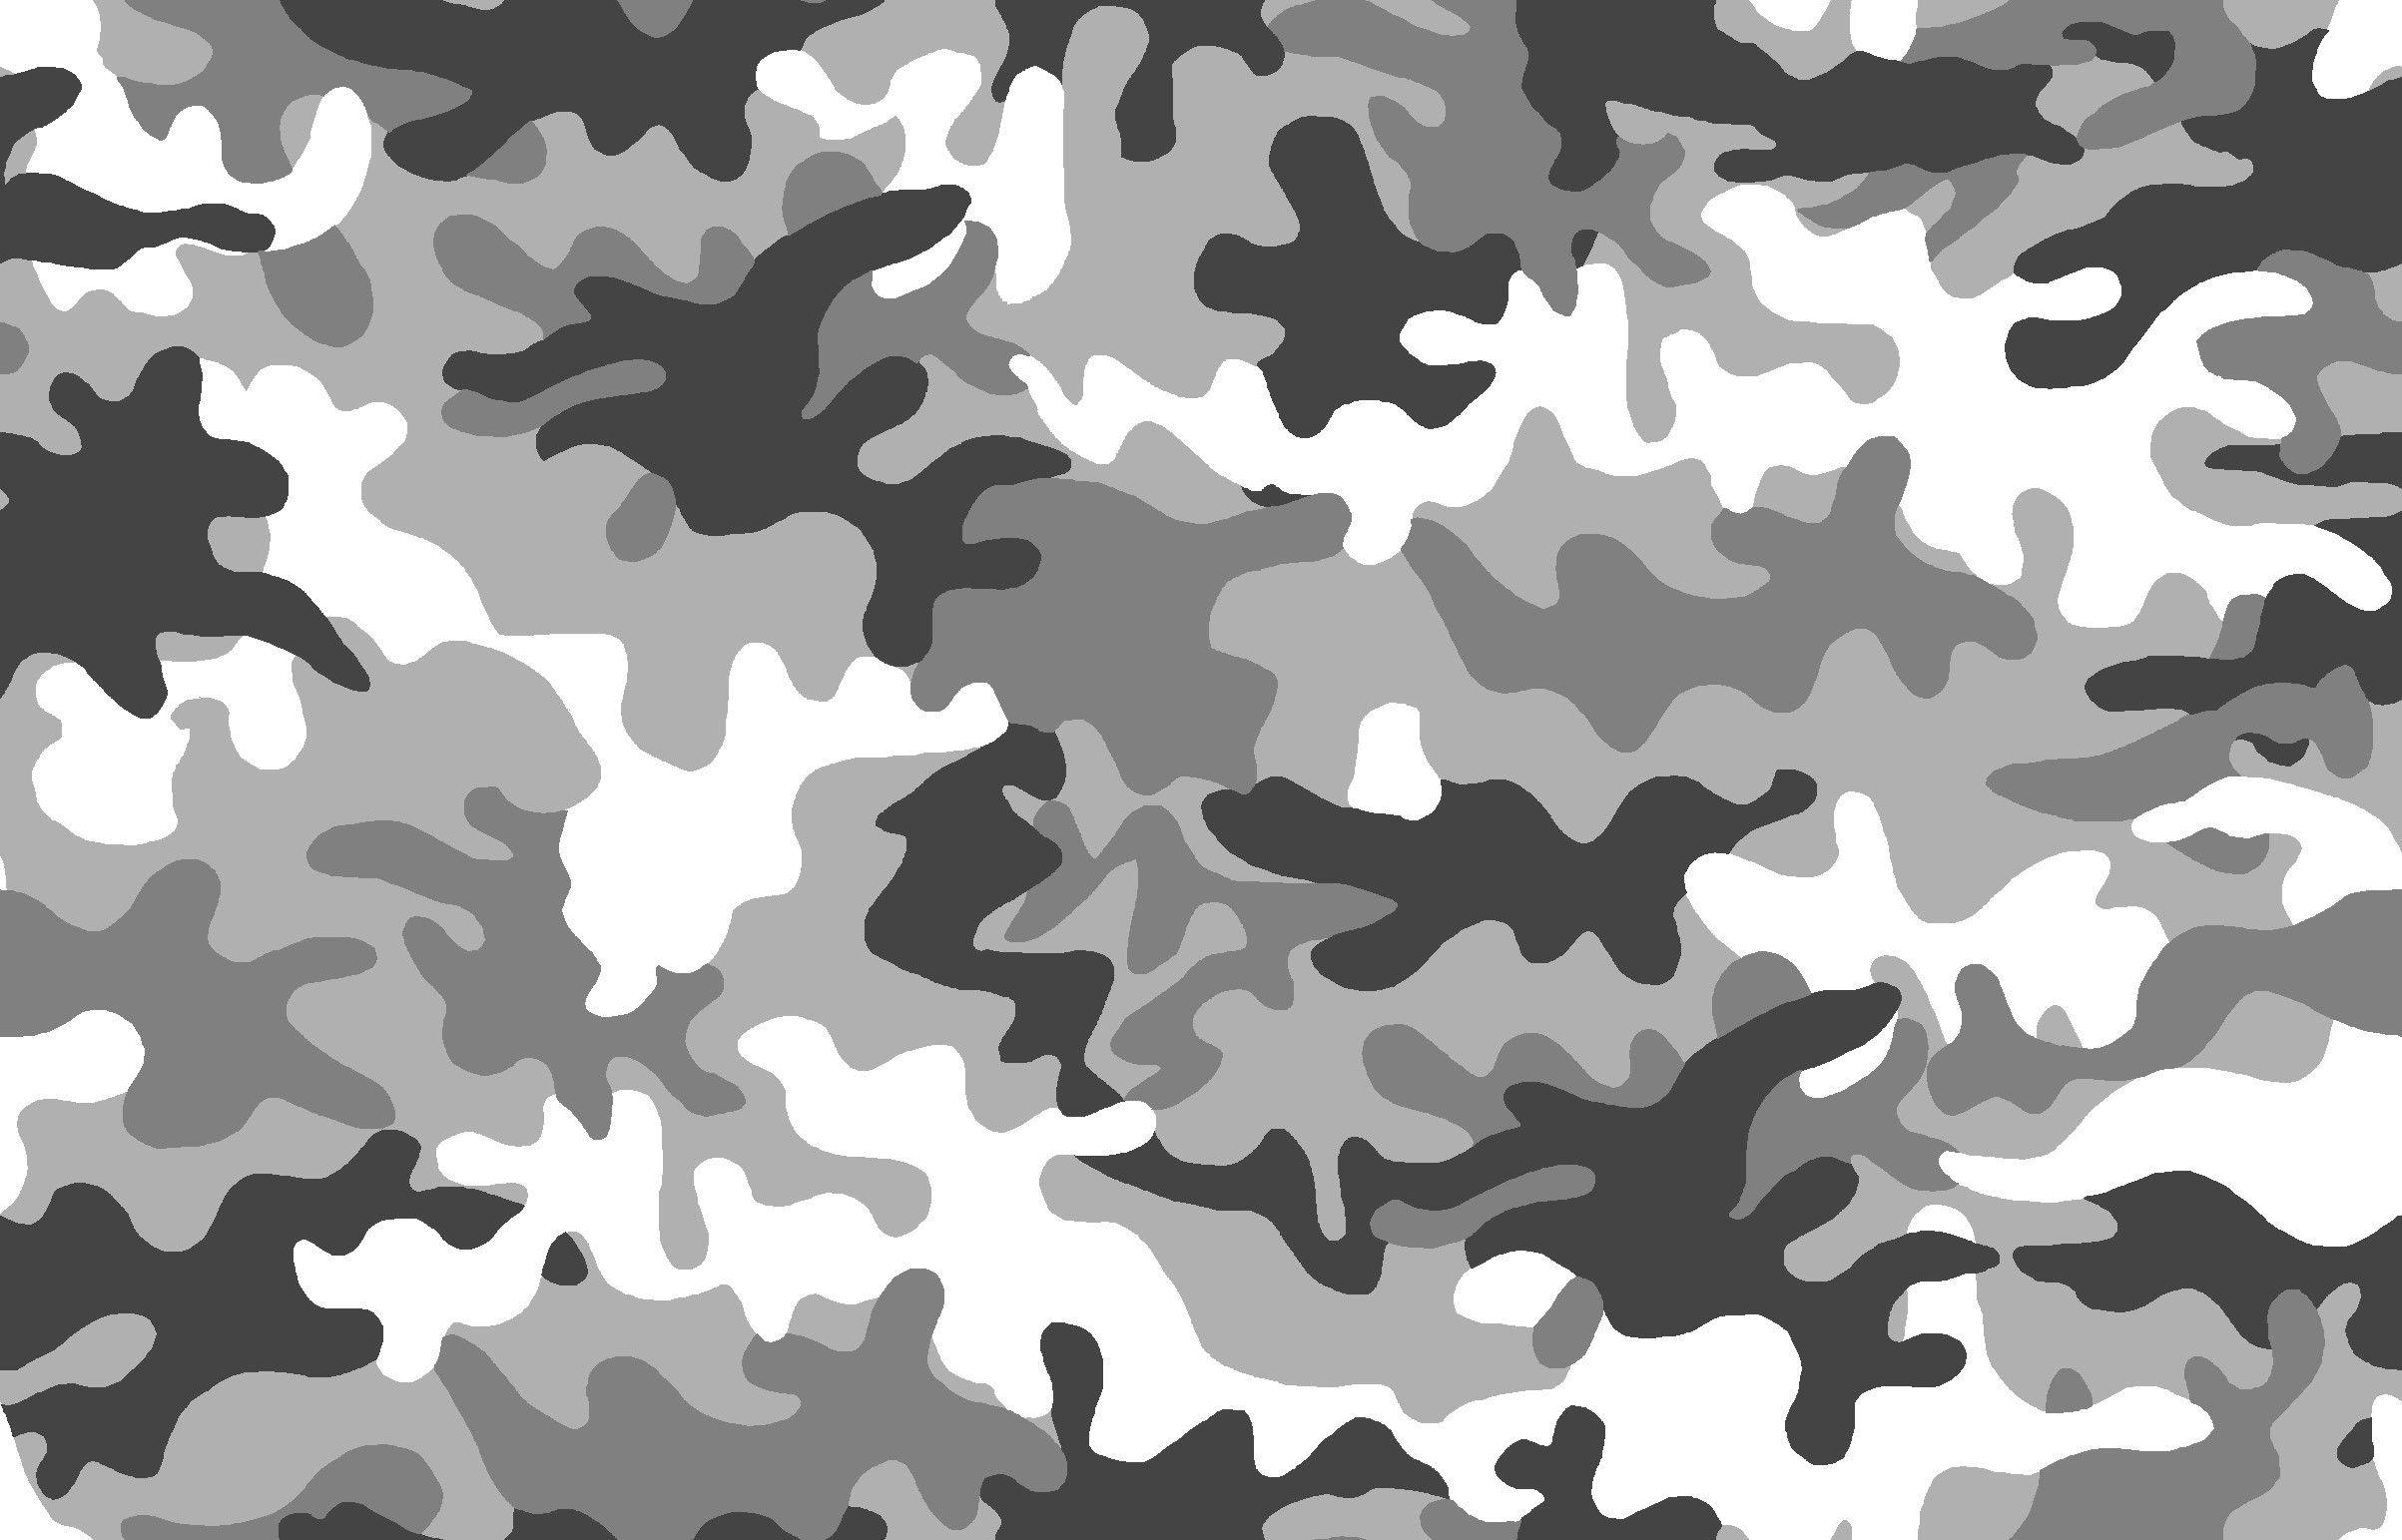 Wallpaper: Cool Camouflage Wallpaper. Camouflage Wallpaper